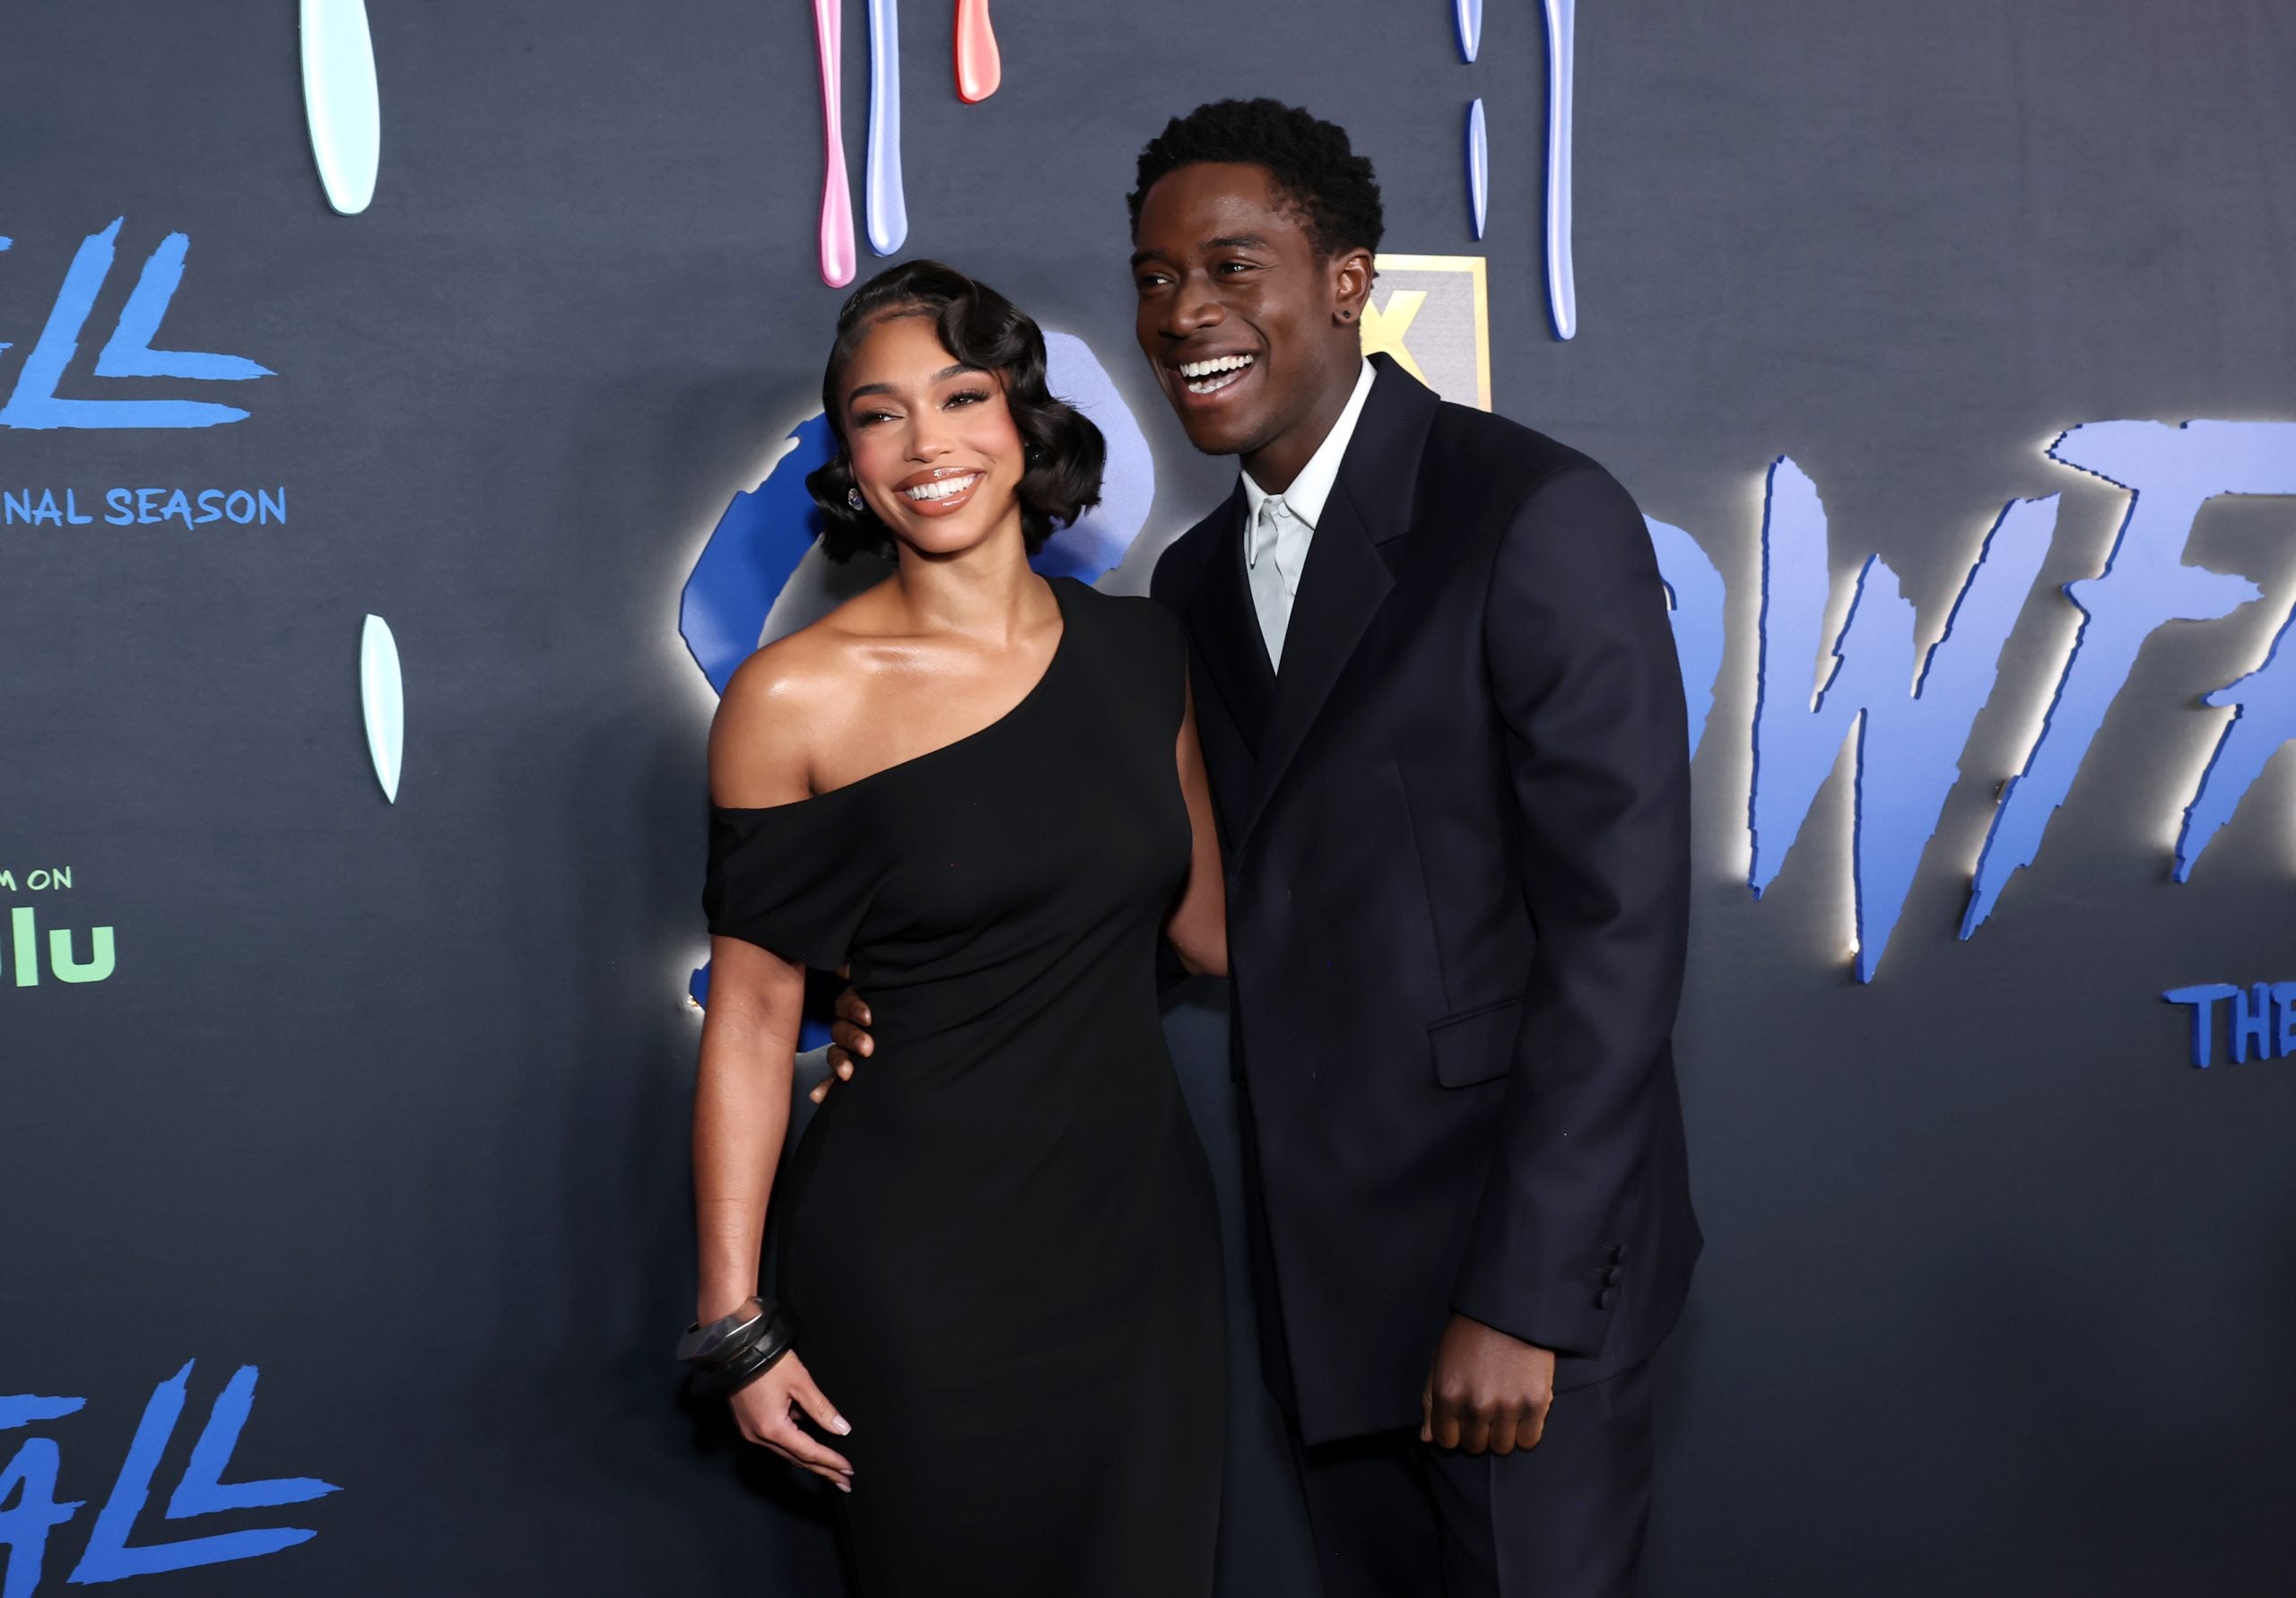 Damson Idris And Lori Harvey Call It Quits After Less Than A Year